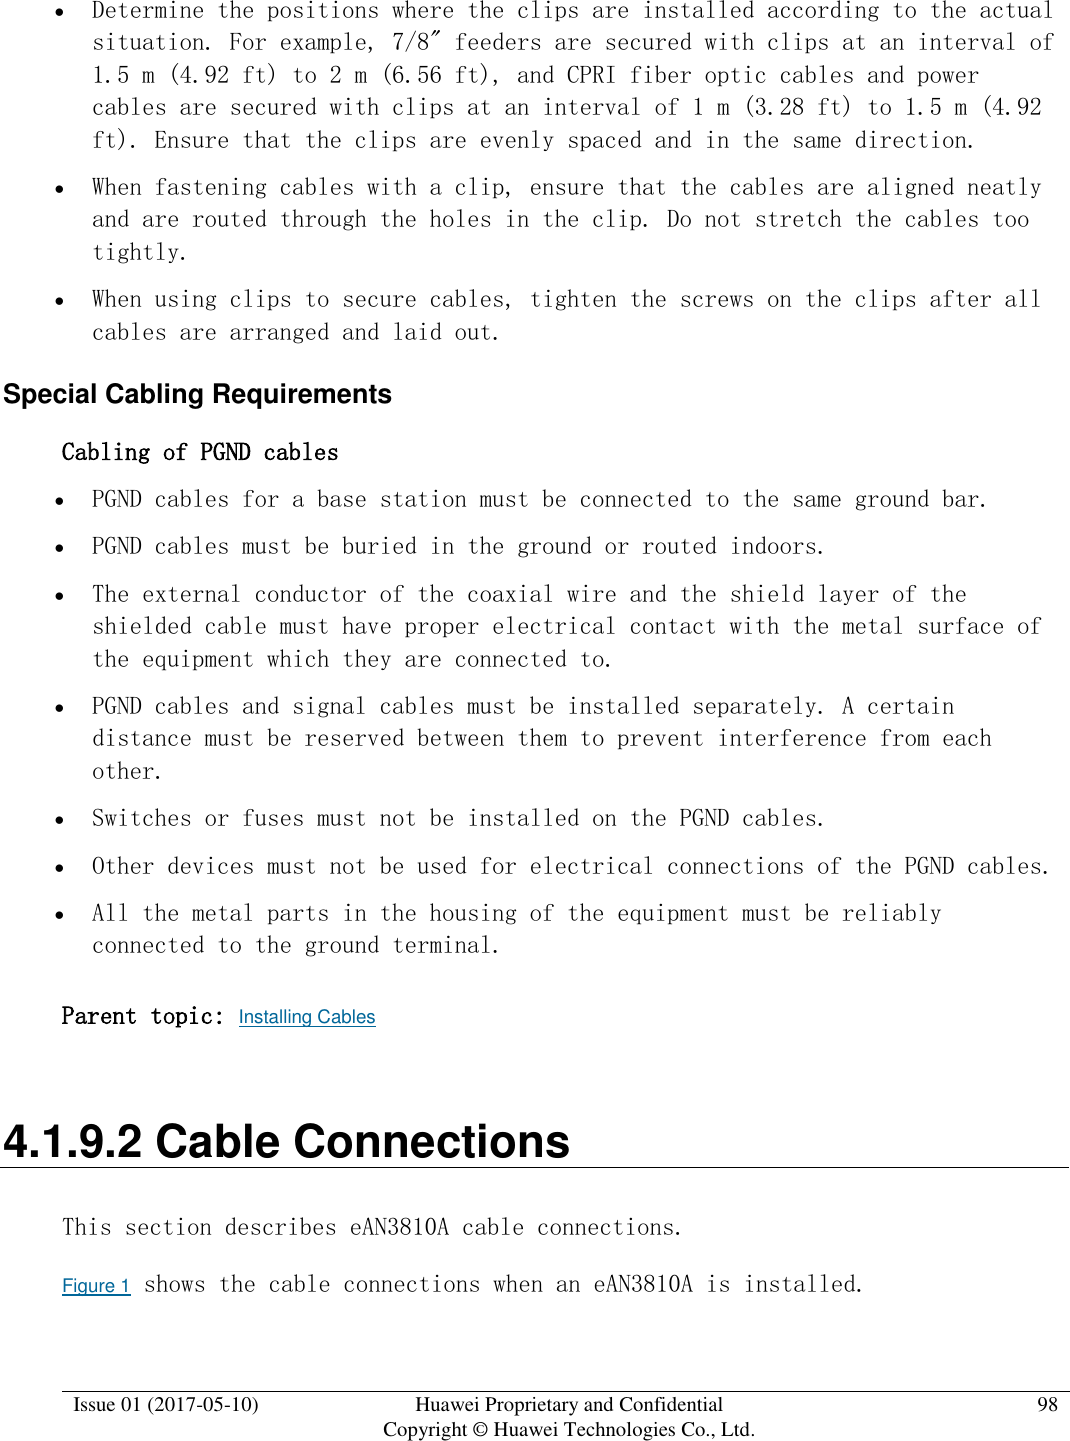  Issue 01 (2017-05-10) Huawei Proprietary and Confidential      Copyright © Huawei Technologies Co., Ltd. 98   Determine the positions where the clips are installed according to the actual situation. For example, 7/8&quot; feeders are secured with clips at an interval of 1.5 m (4.92 ft) to 2 m (6.56 ft), and CPRI fiber optic cables and power cables are secured with clips at an interval of 1 m (3.28 ft) to 1.5 m (4.92 ft). Ensure that the clips are evenly spaced and in the same direction.  When fastening cables with a clip, ensure that the cables are aligned neatly and are routed through the holes in the clip. Do not stretch the cables too tightly.  When using clips to secure cables, tighten the screws on the clips after all cables are arranged and laid out. Special Cabling Requirements Cabling of PGND cables  PGND cables for a base station must be connected to the same ground bar.  PGND cables must be buried in the ground or routed indoors.  The external conductor of the coaxial wire and the shield layer of the shielded cable must have proper electrical contact with the metal surface of the equipment which they are connected to.  PGND cables and signal cables must be installed separately. A certain distance must be reserved between them to prevent interference from each other.  Switches or fuses must not be installed on the PGND cables.  Other devices must not be used for electrical connections of the PGND cables.  All the metal parts in the housing of the equipment must be reliably connected to the ground terminal. Parent topic: Installing Cables 4.1.9.2 Cable Connections This section describes eAN3810A cable connections. Figure 1 shows the cable connections when an eAN3810A is installed. 